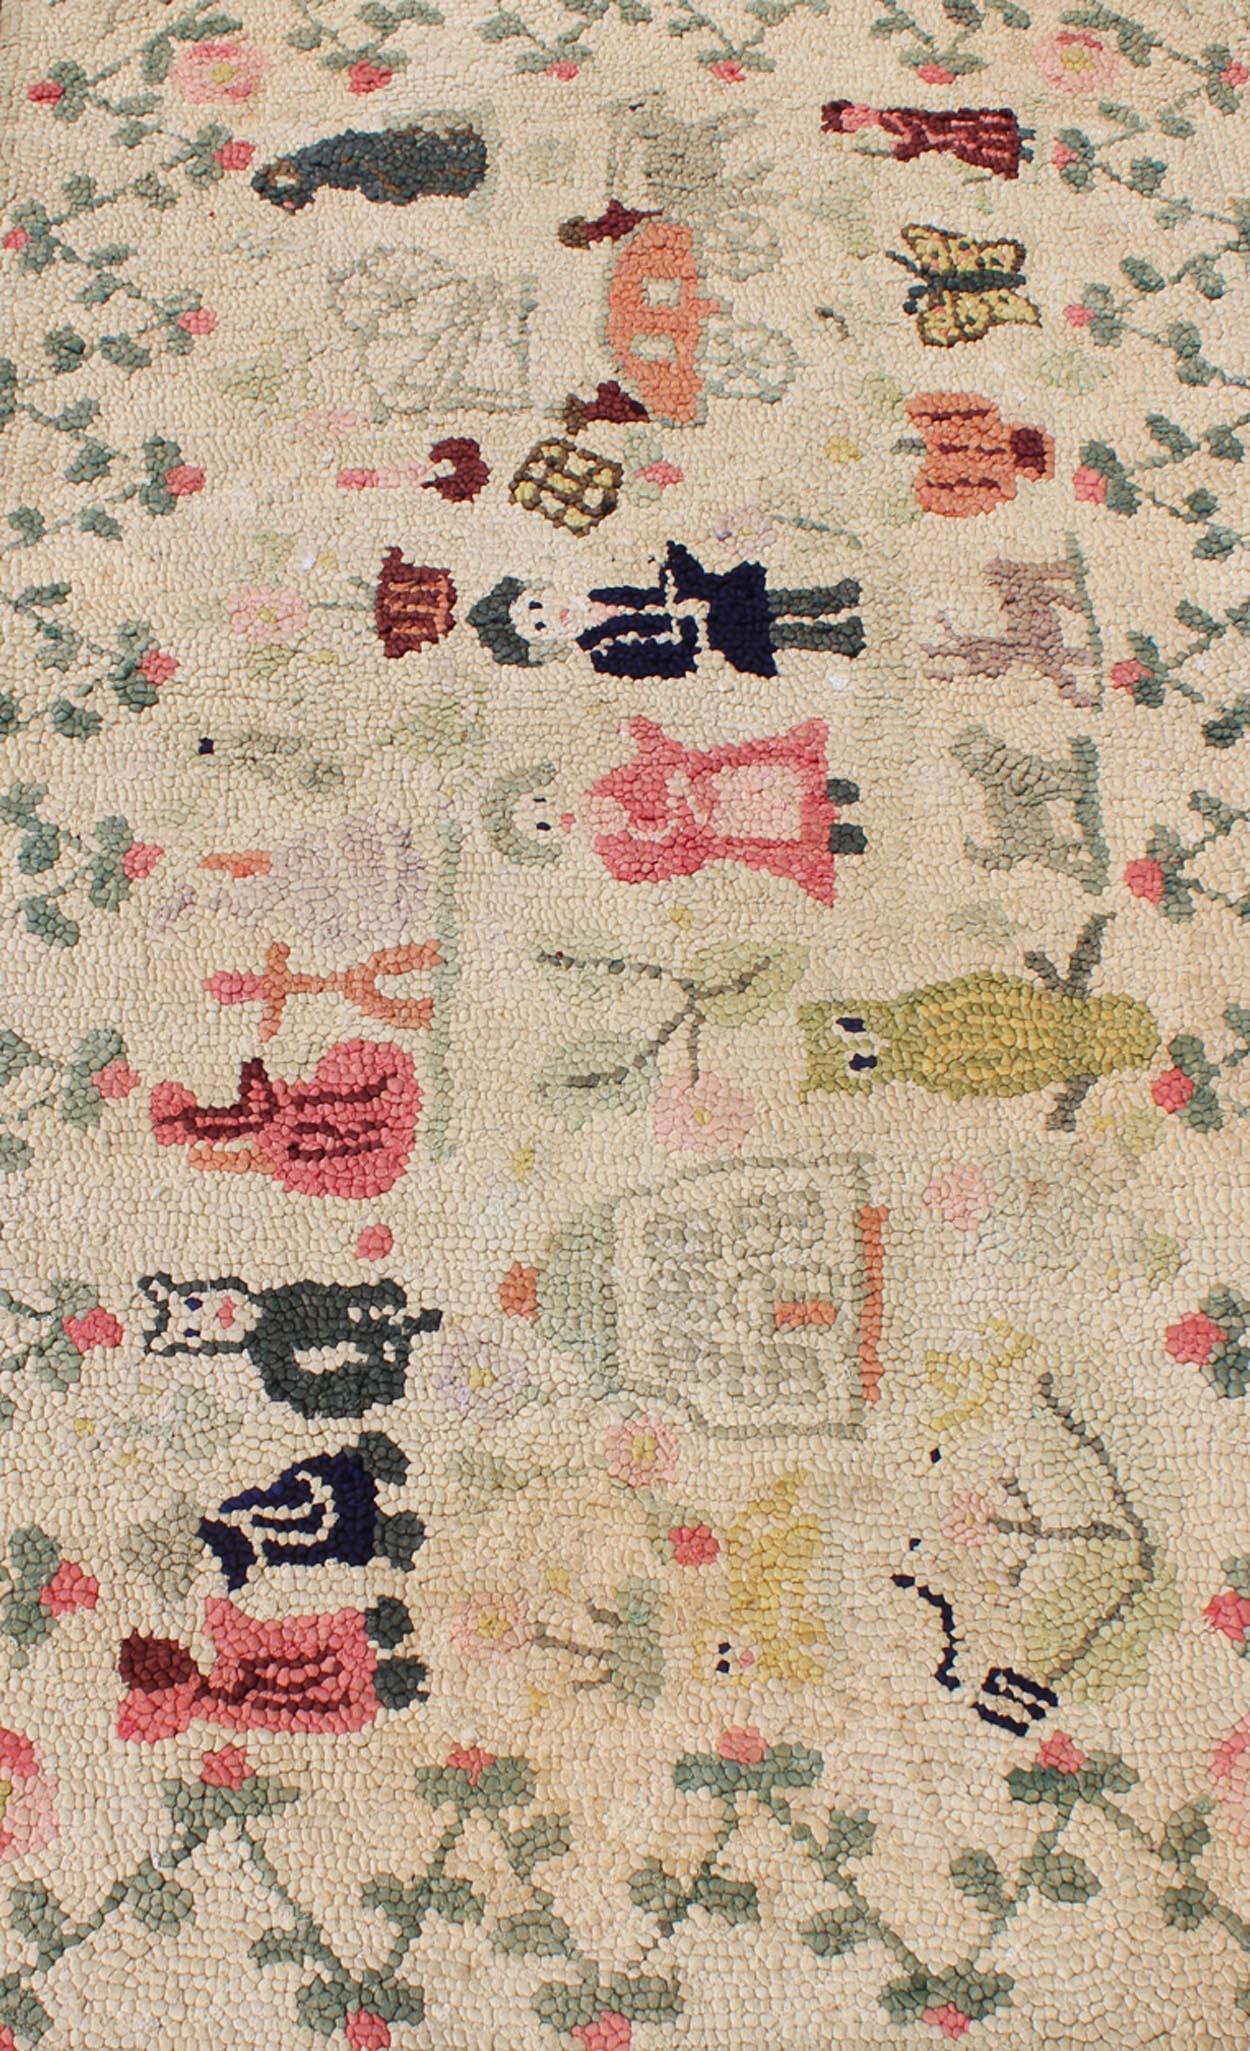 Antique American Hooked Rug Featuring Colorful Village Scene For Sale 1